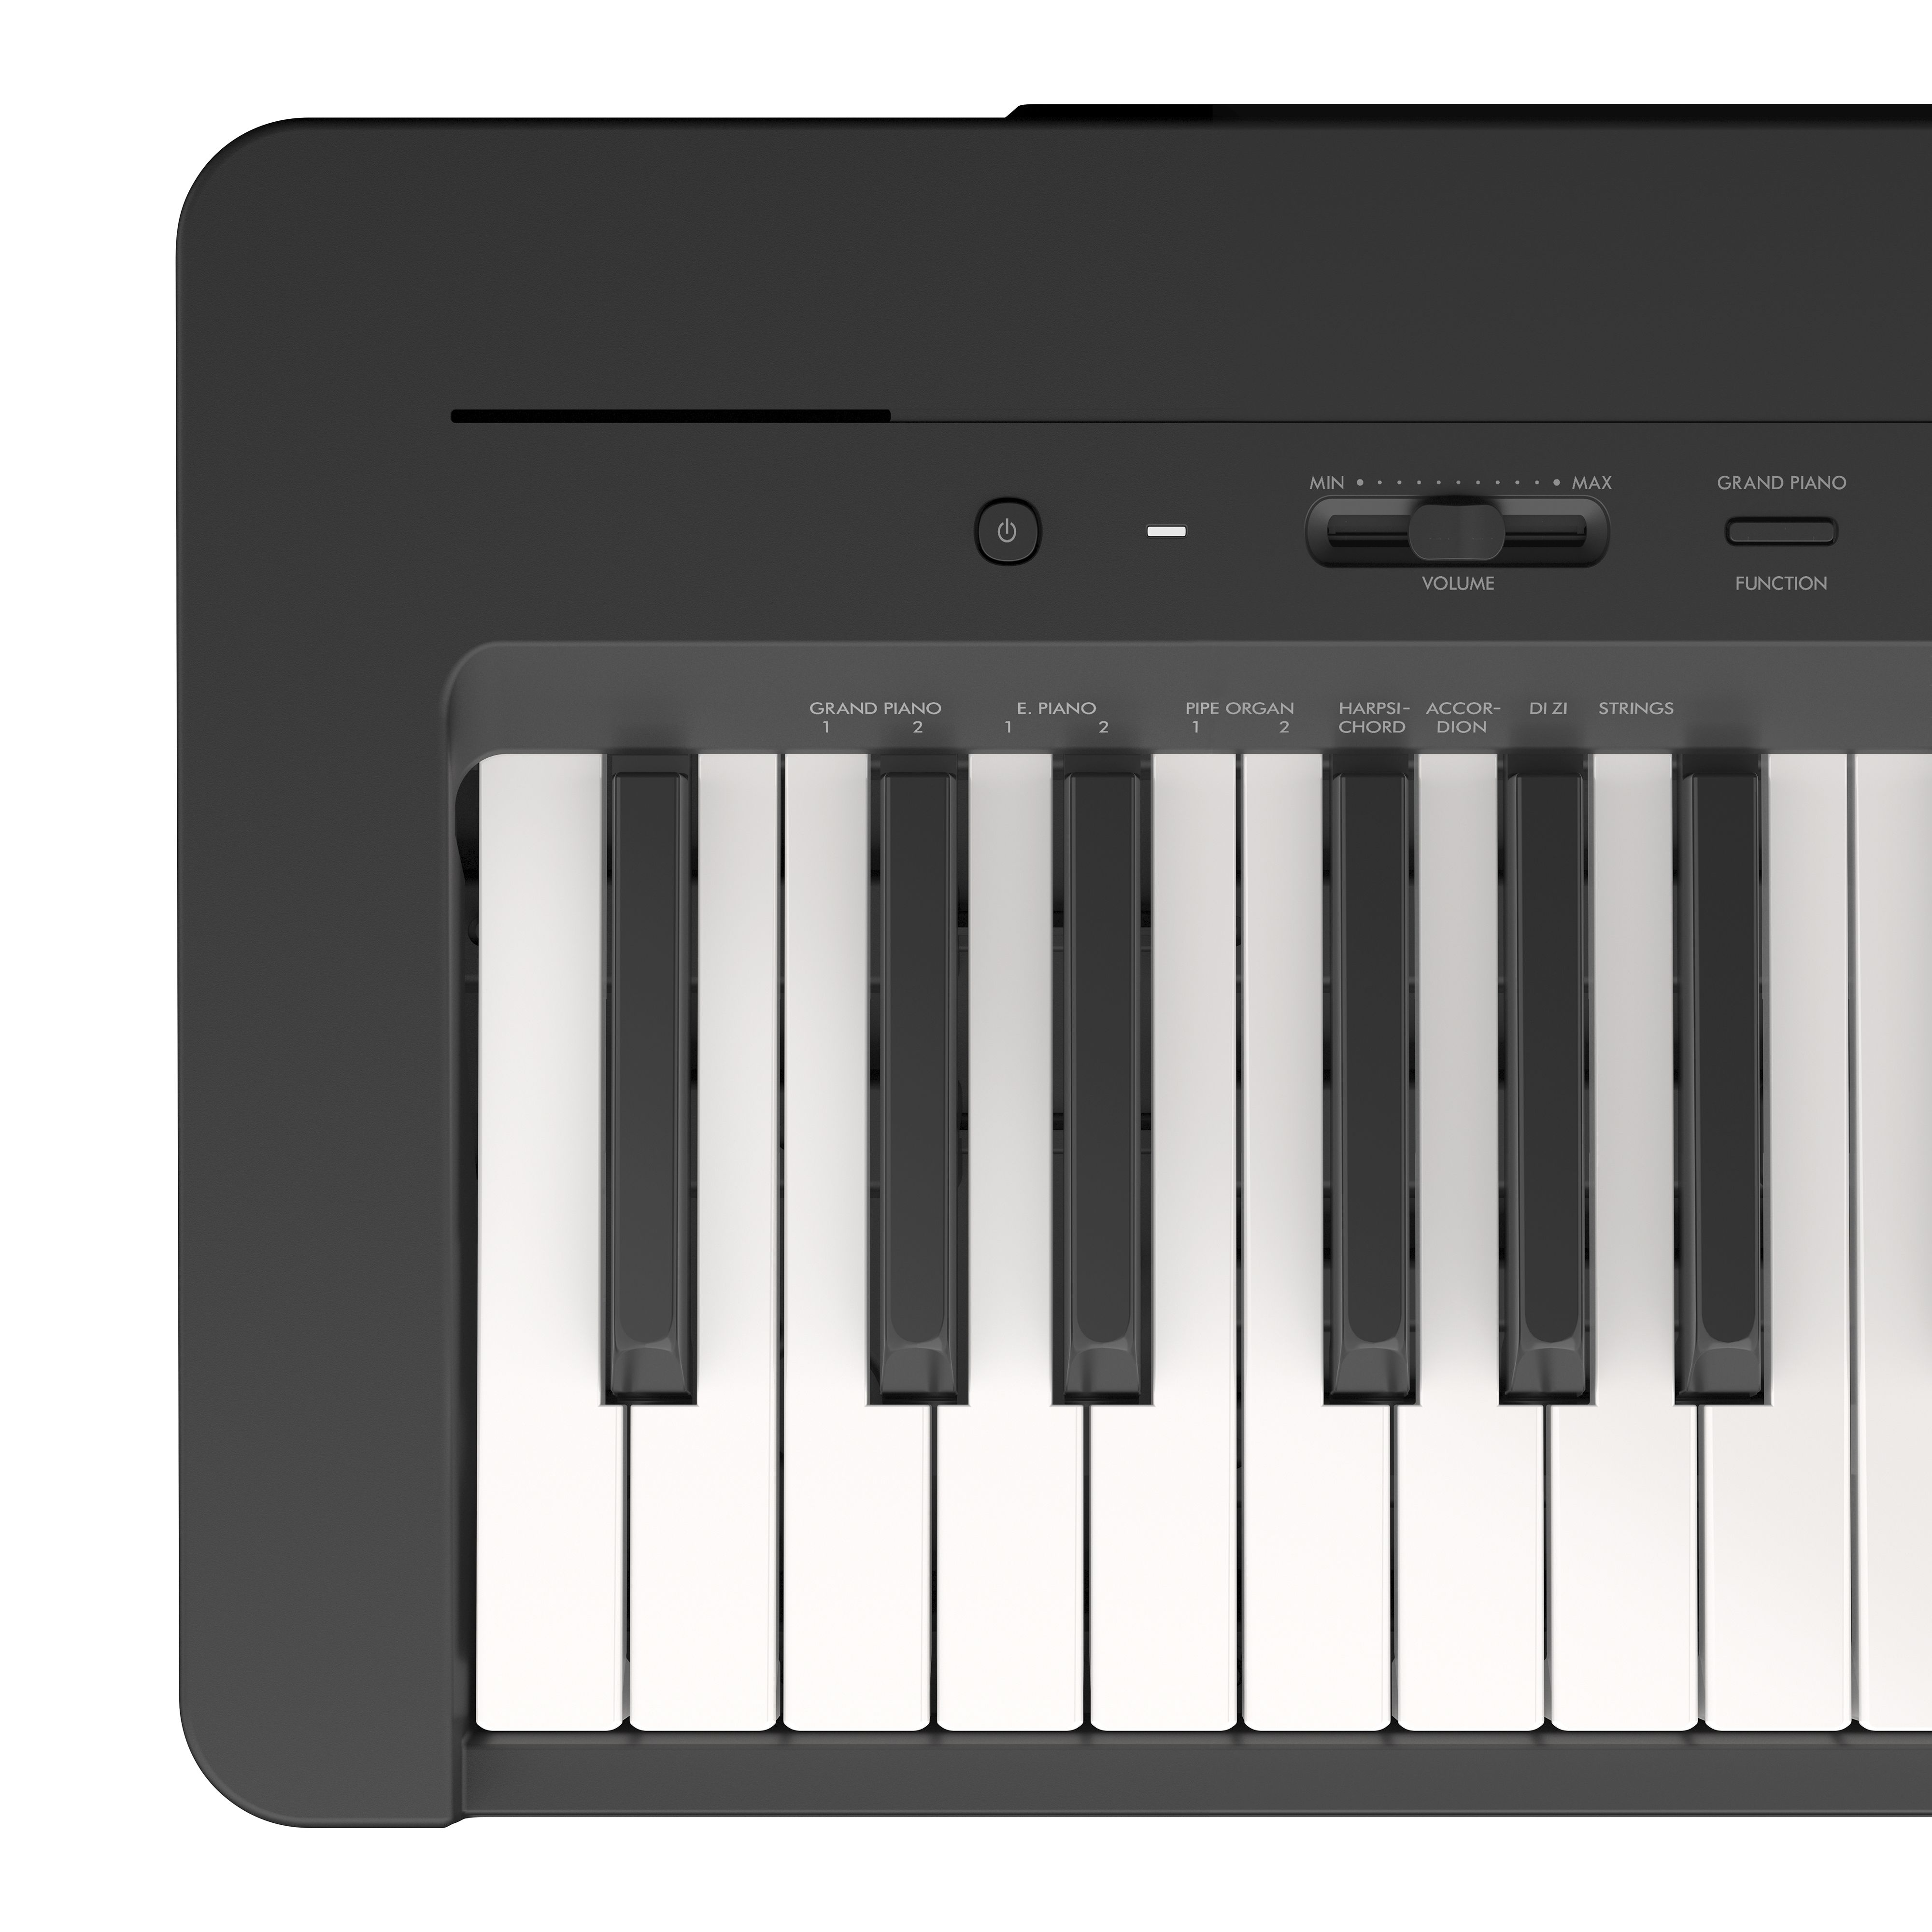 P-145 - Instruments Other - - - - P Musical - Products Pianos European - Yamaha Overview Countries Series